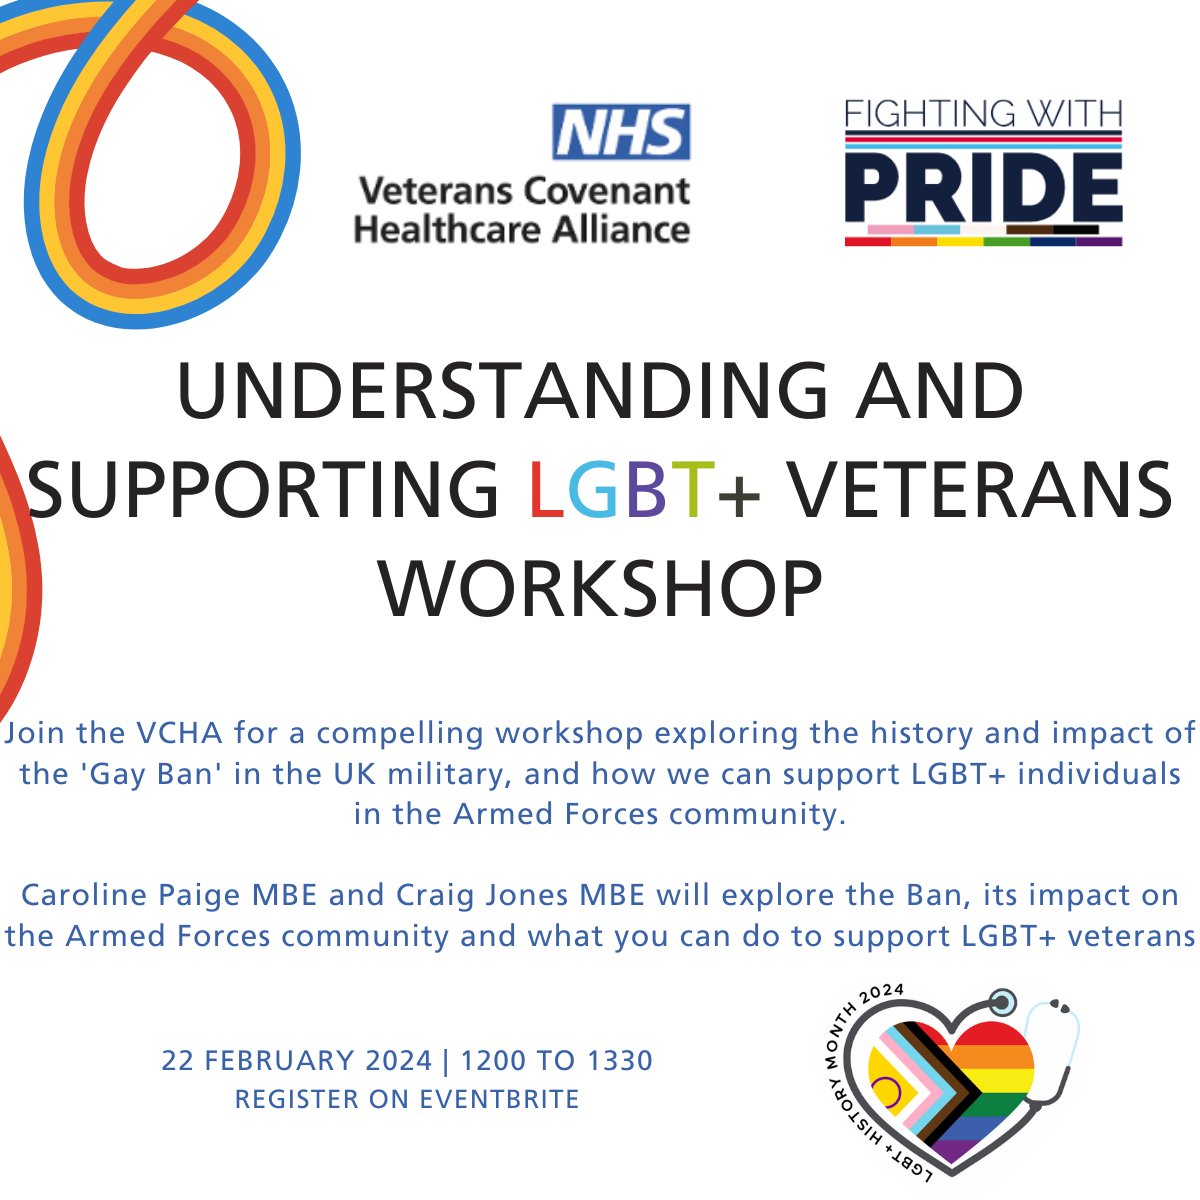 🌈 Join us for a vital workshop on 'Understanding and Supporting LGBT+ Veterans' on 22nd Feb! Insightful talks by @caz_paige & @CraigJonesMBE of @fightingwpride. Let's learn and support together! 🌟 #UnderTheScope #LGBTHistoryMonth Register now: ticketsource.co.uk/veterans-coven…